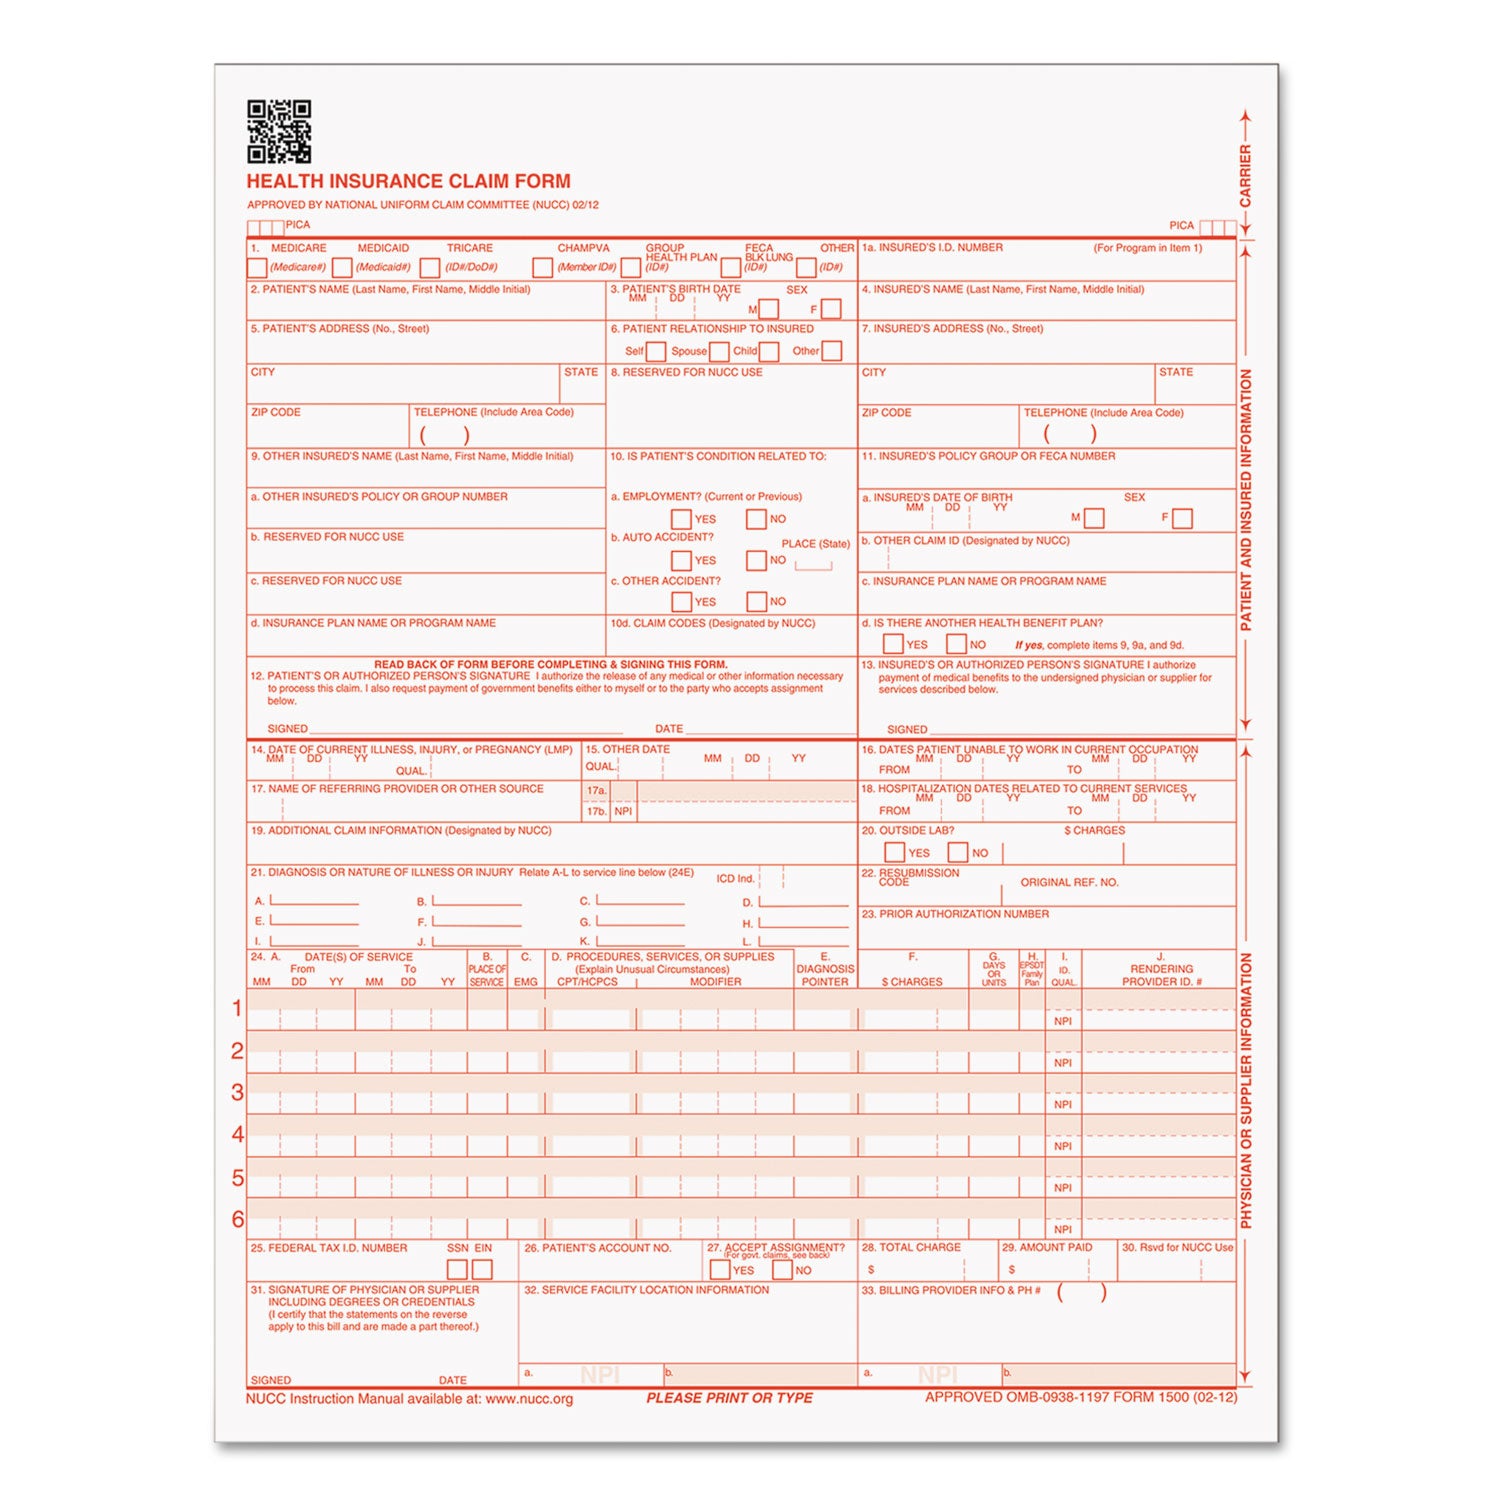 CMS-1500 Medicare/Medicaid Forms for Laser Printers, One-Part (No Copies), 8.5 x 11, 500 Forms Total - 